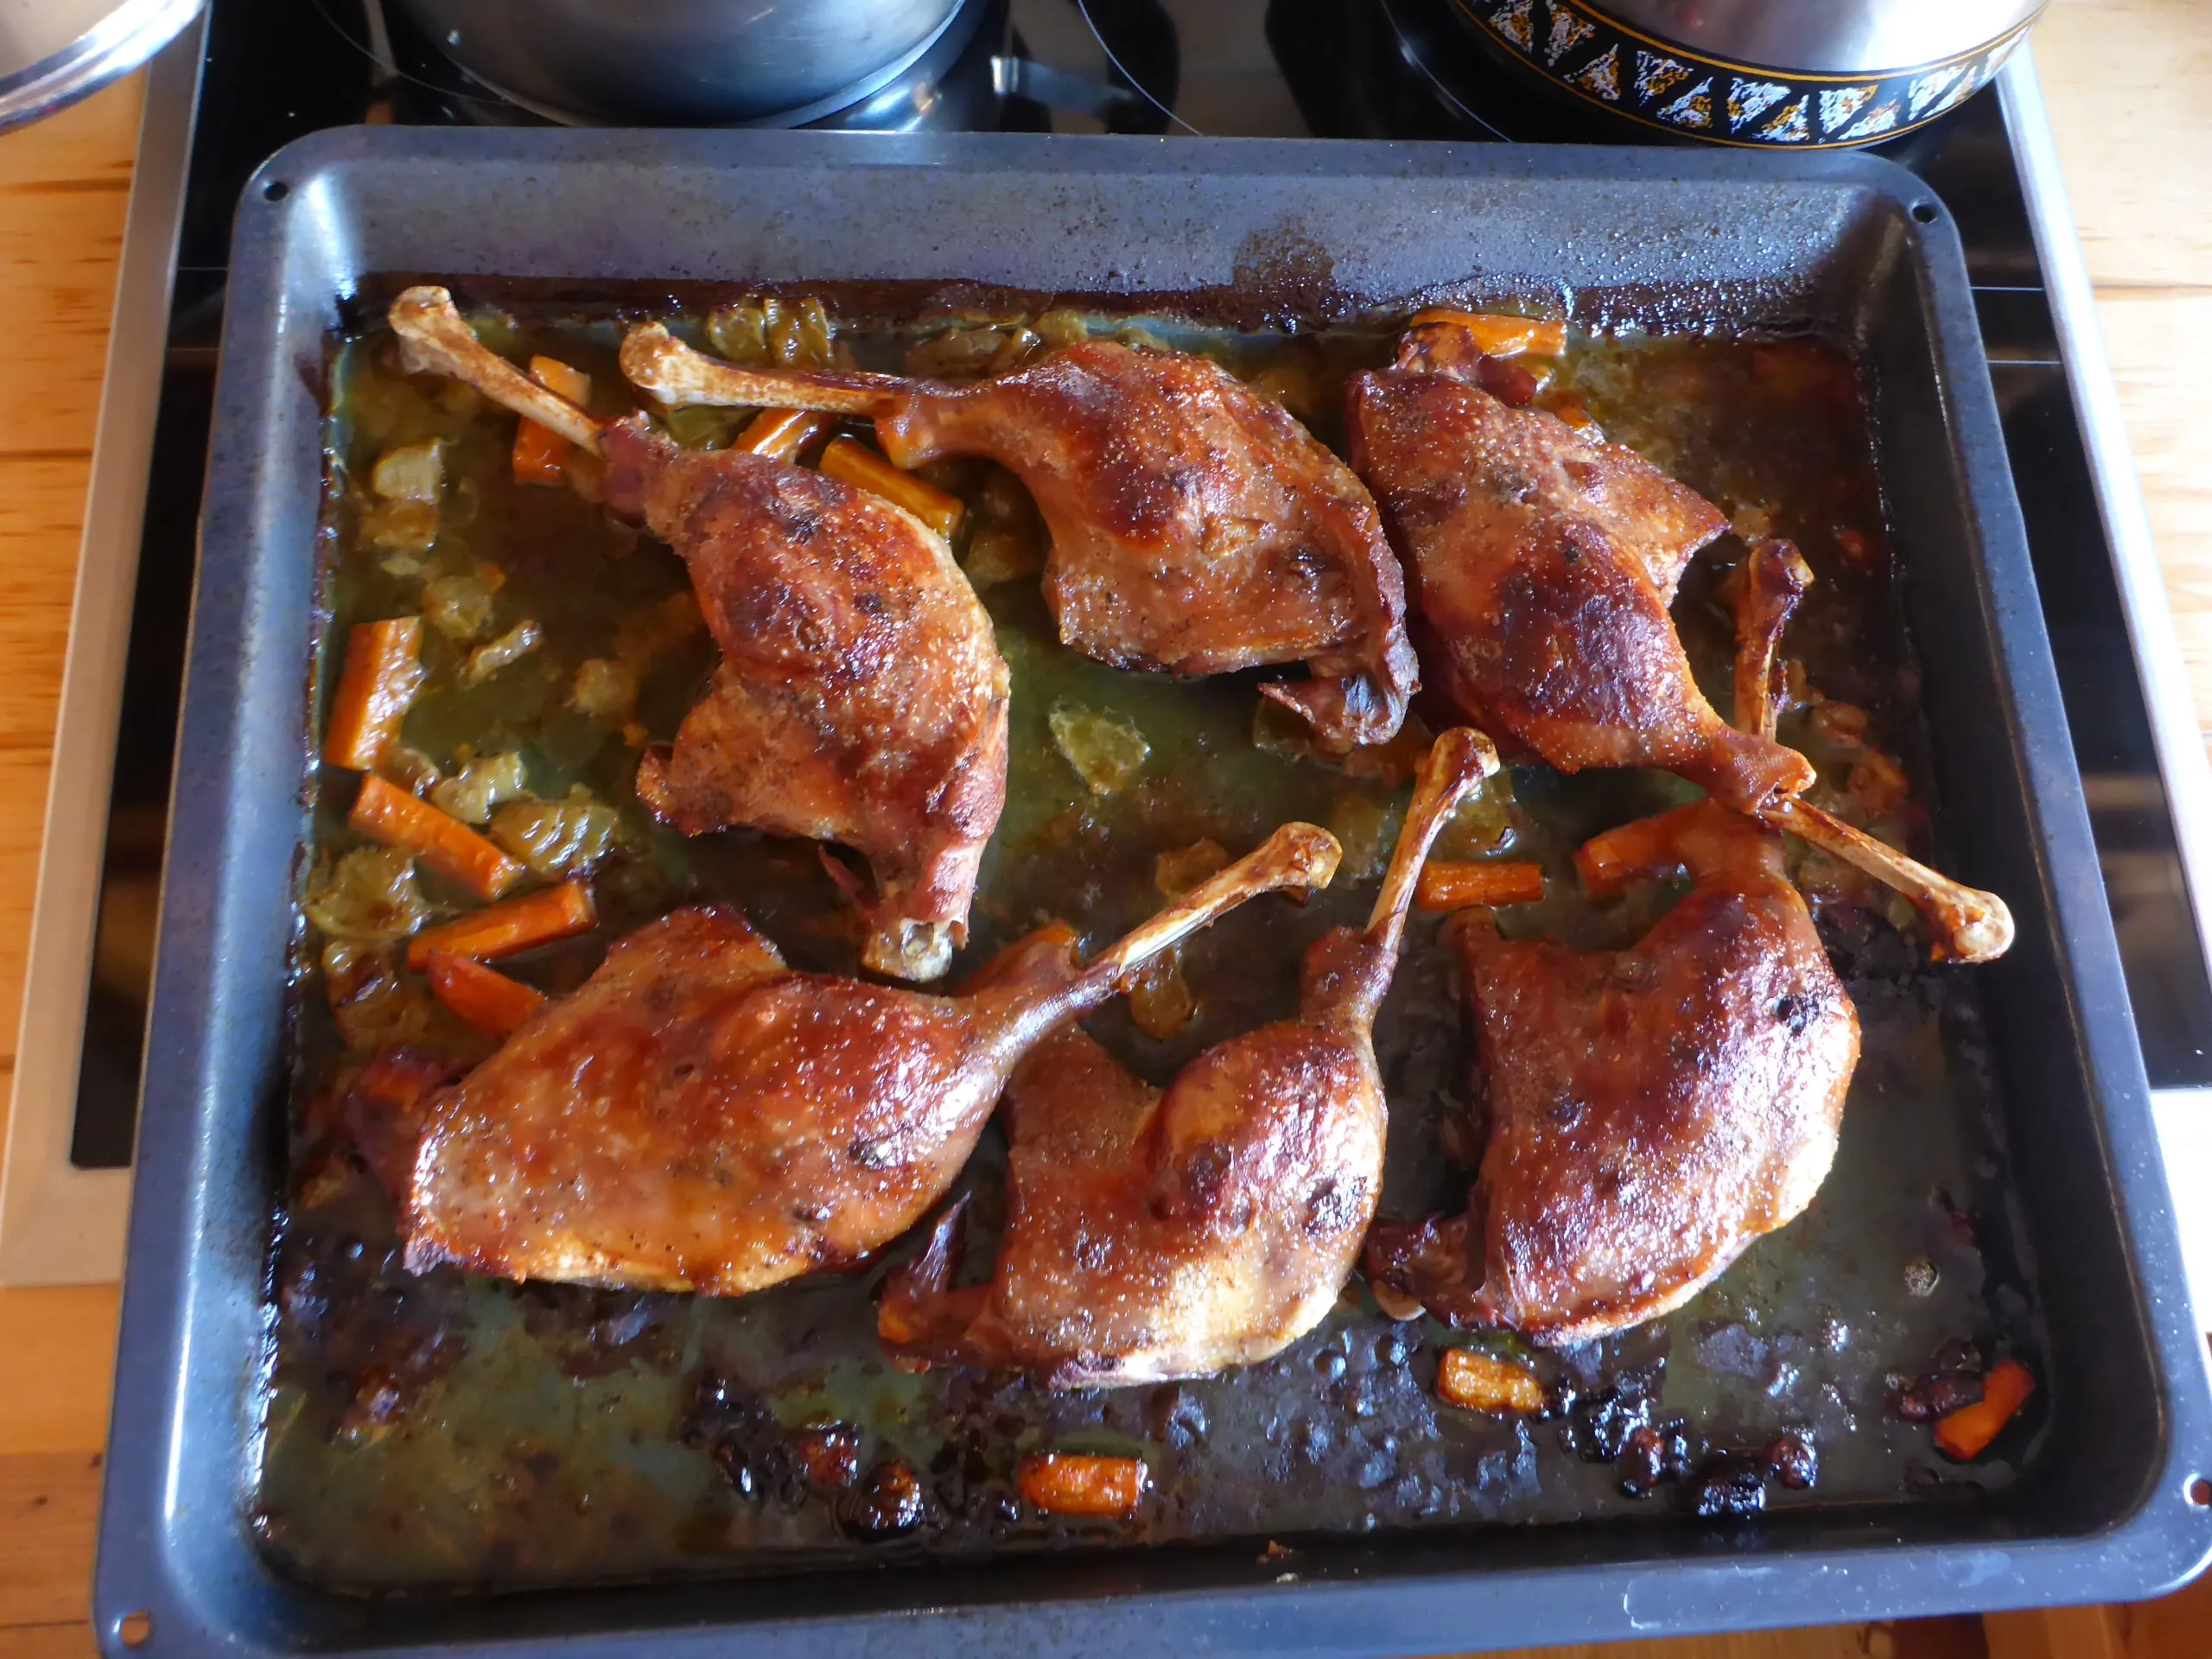 German roasted Goose legs, carrots and onions on a baking sheet with beautifully crispy skin after roasting.